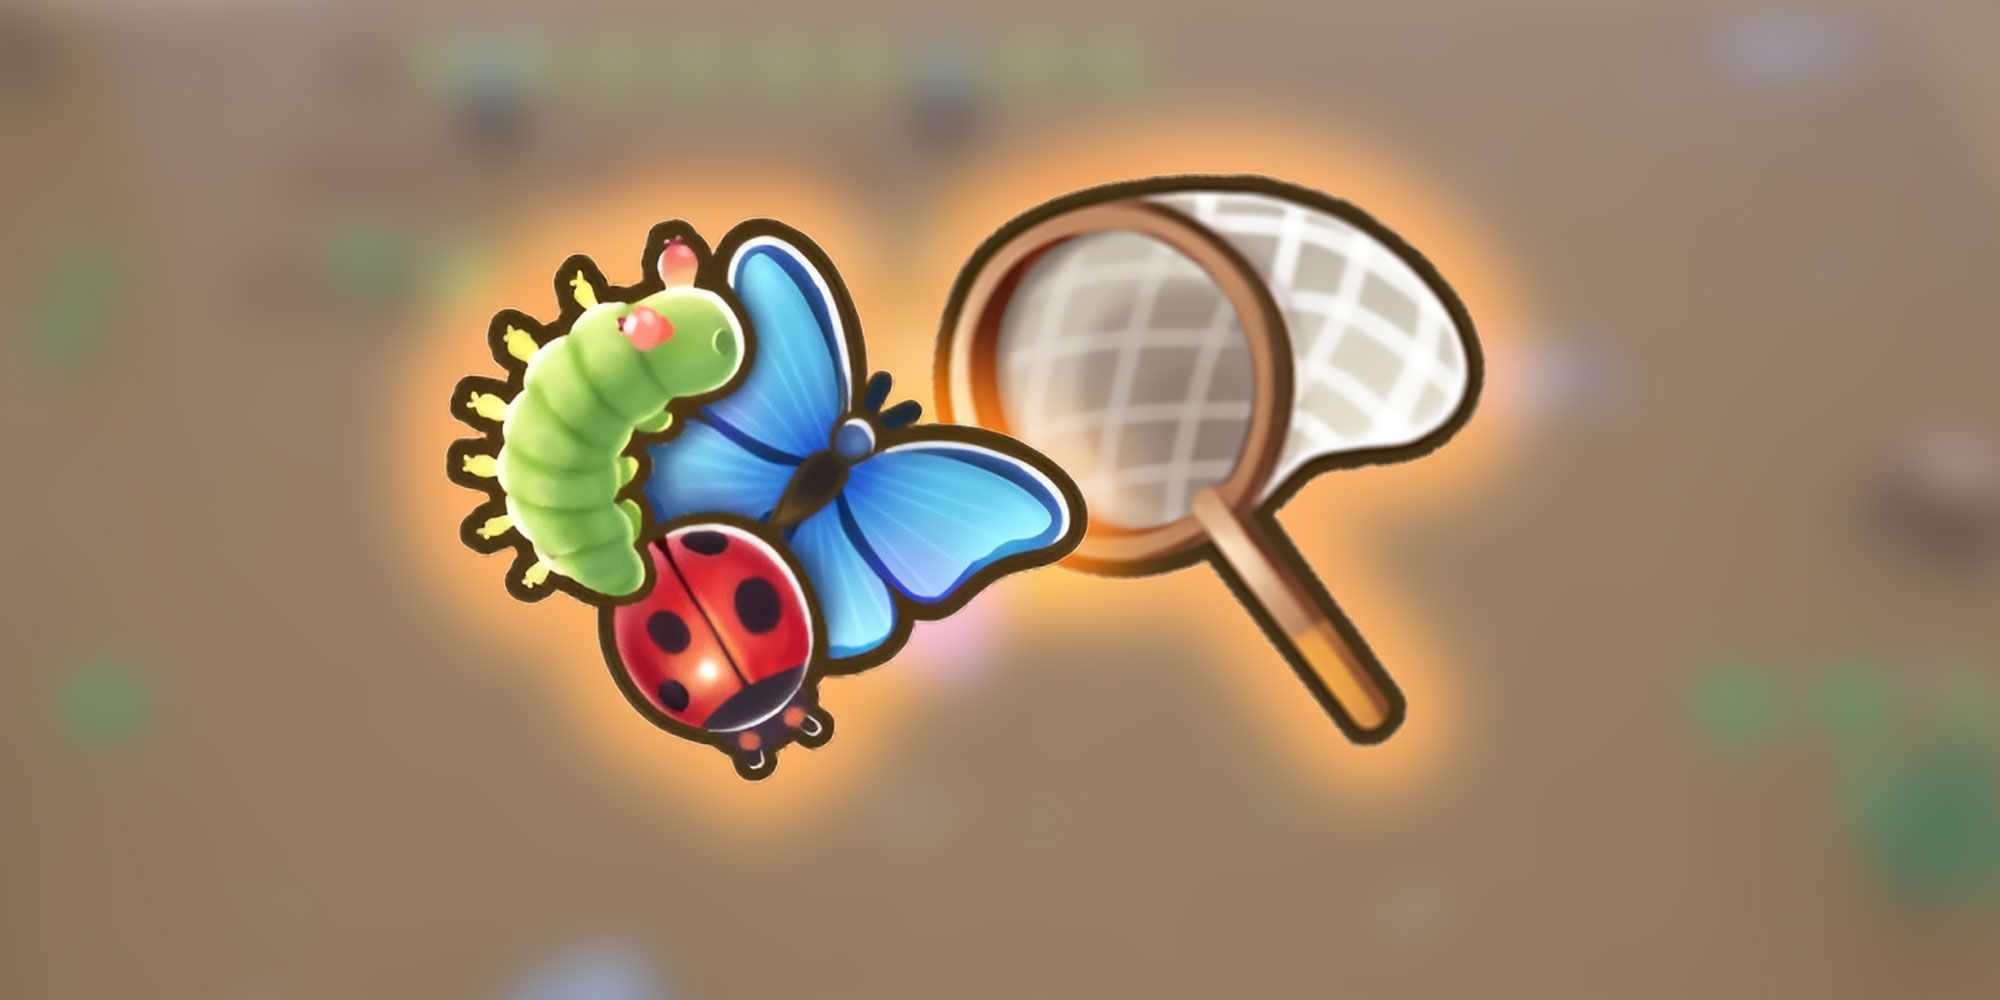 An image of some insects and the bug net from Coral Island, the background is blurred, so as to make the icons pop out.